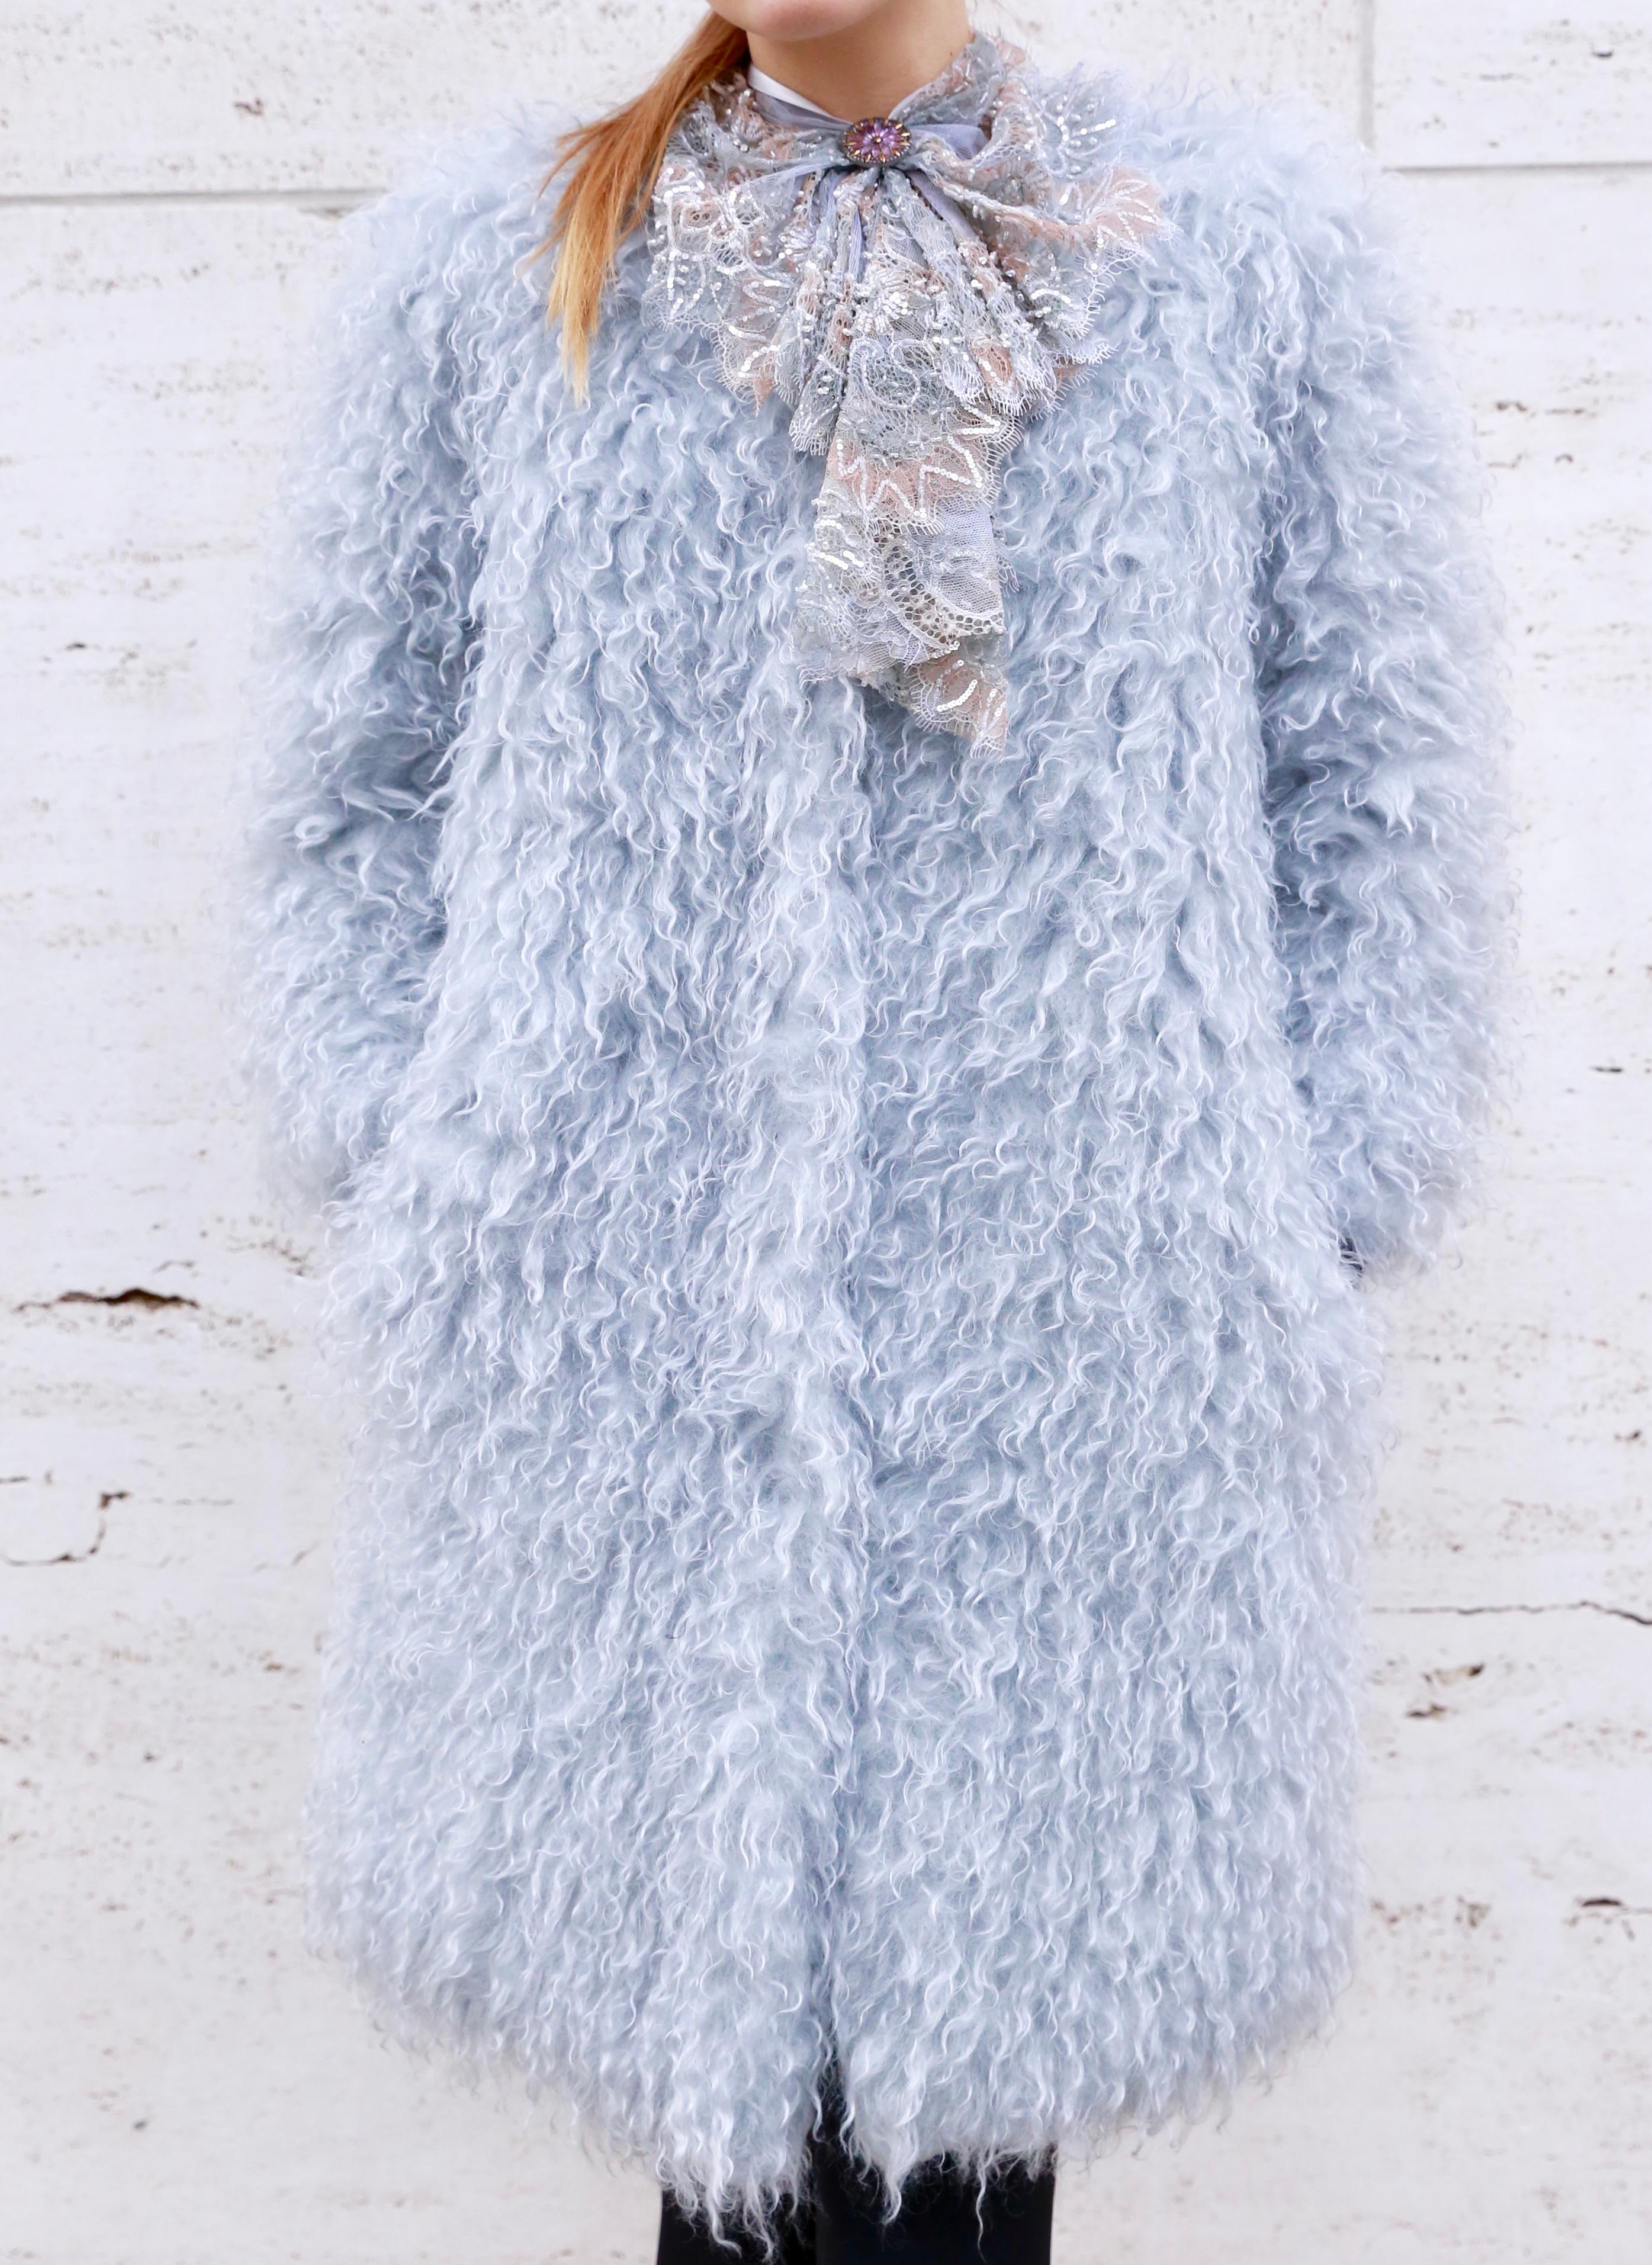 The Farrah baby blue mohair coat is a one of a kind exclusive piece. Featuring the highest quality mohair in the world made by an historic mill in Europe, this lightweight and extremely warm coat will be your favorite garment to wear during the